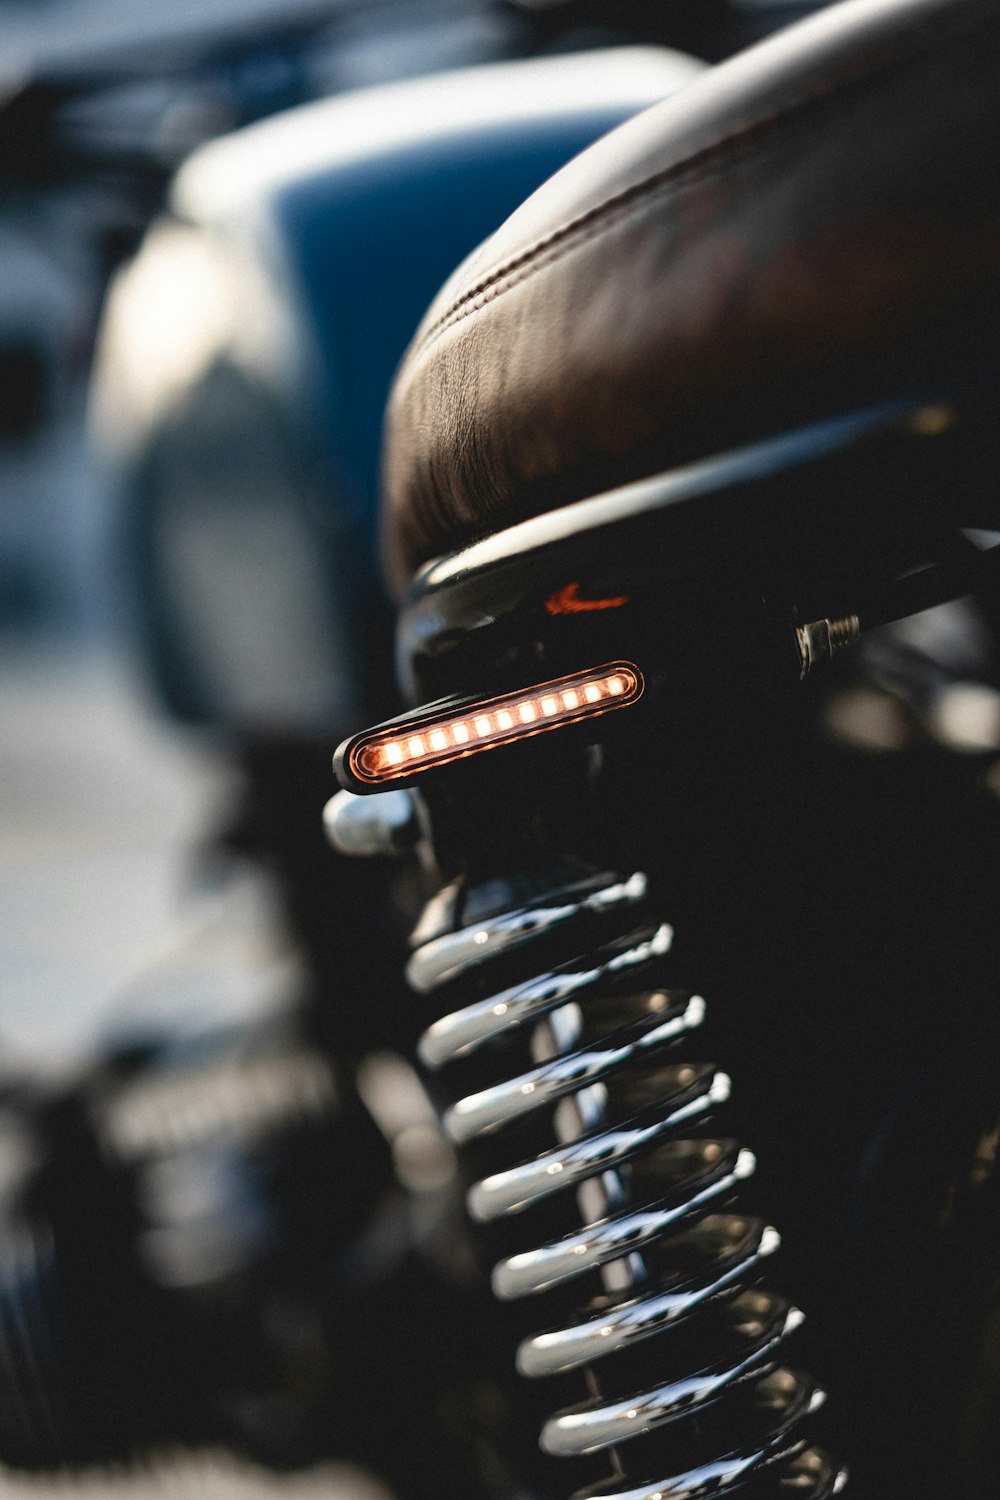 a close up of a motorcycle with a light on